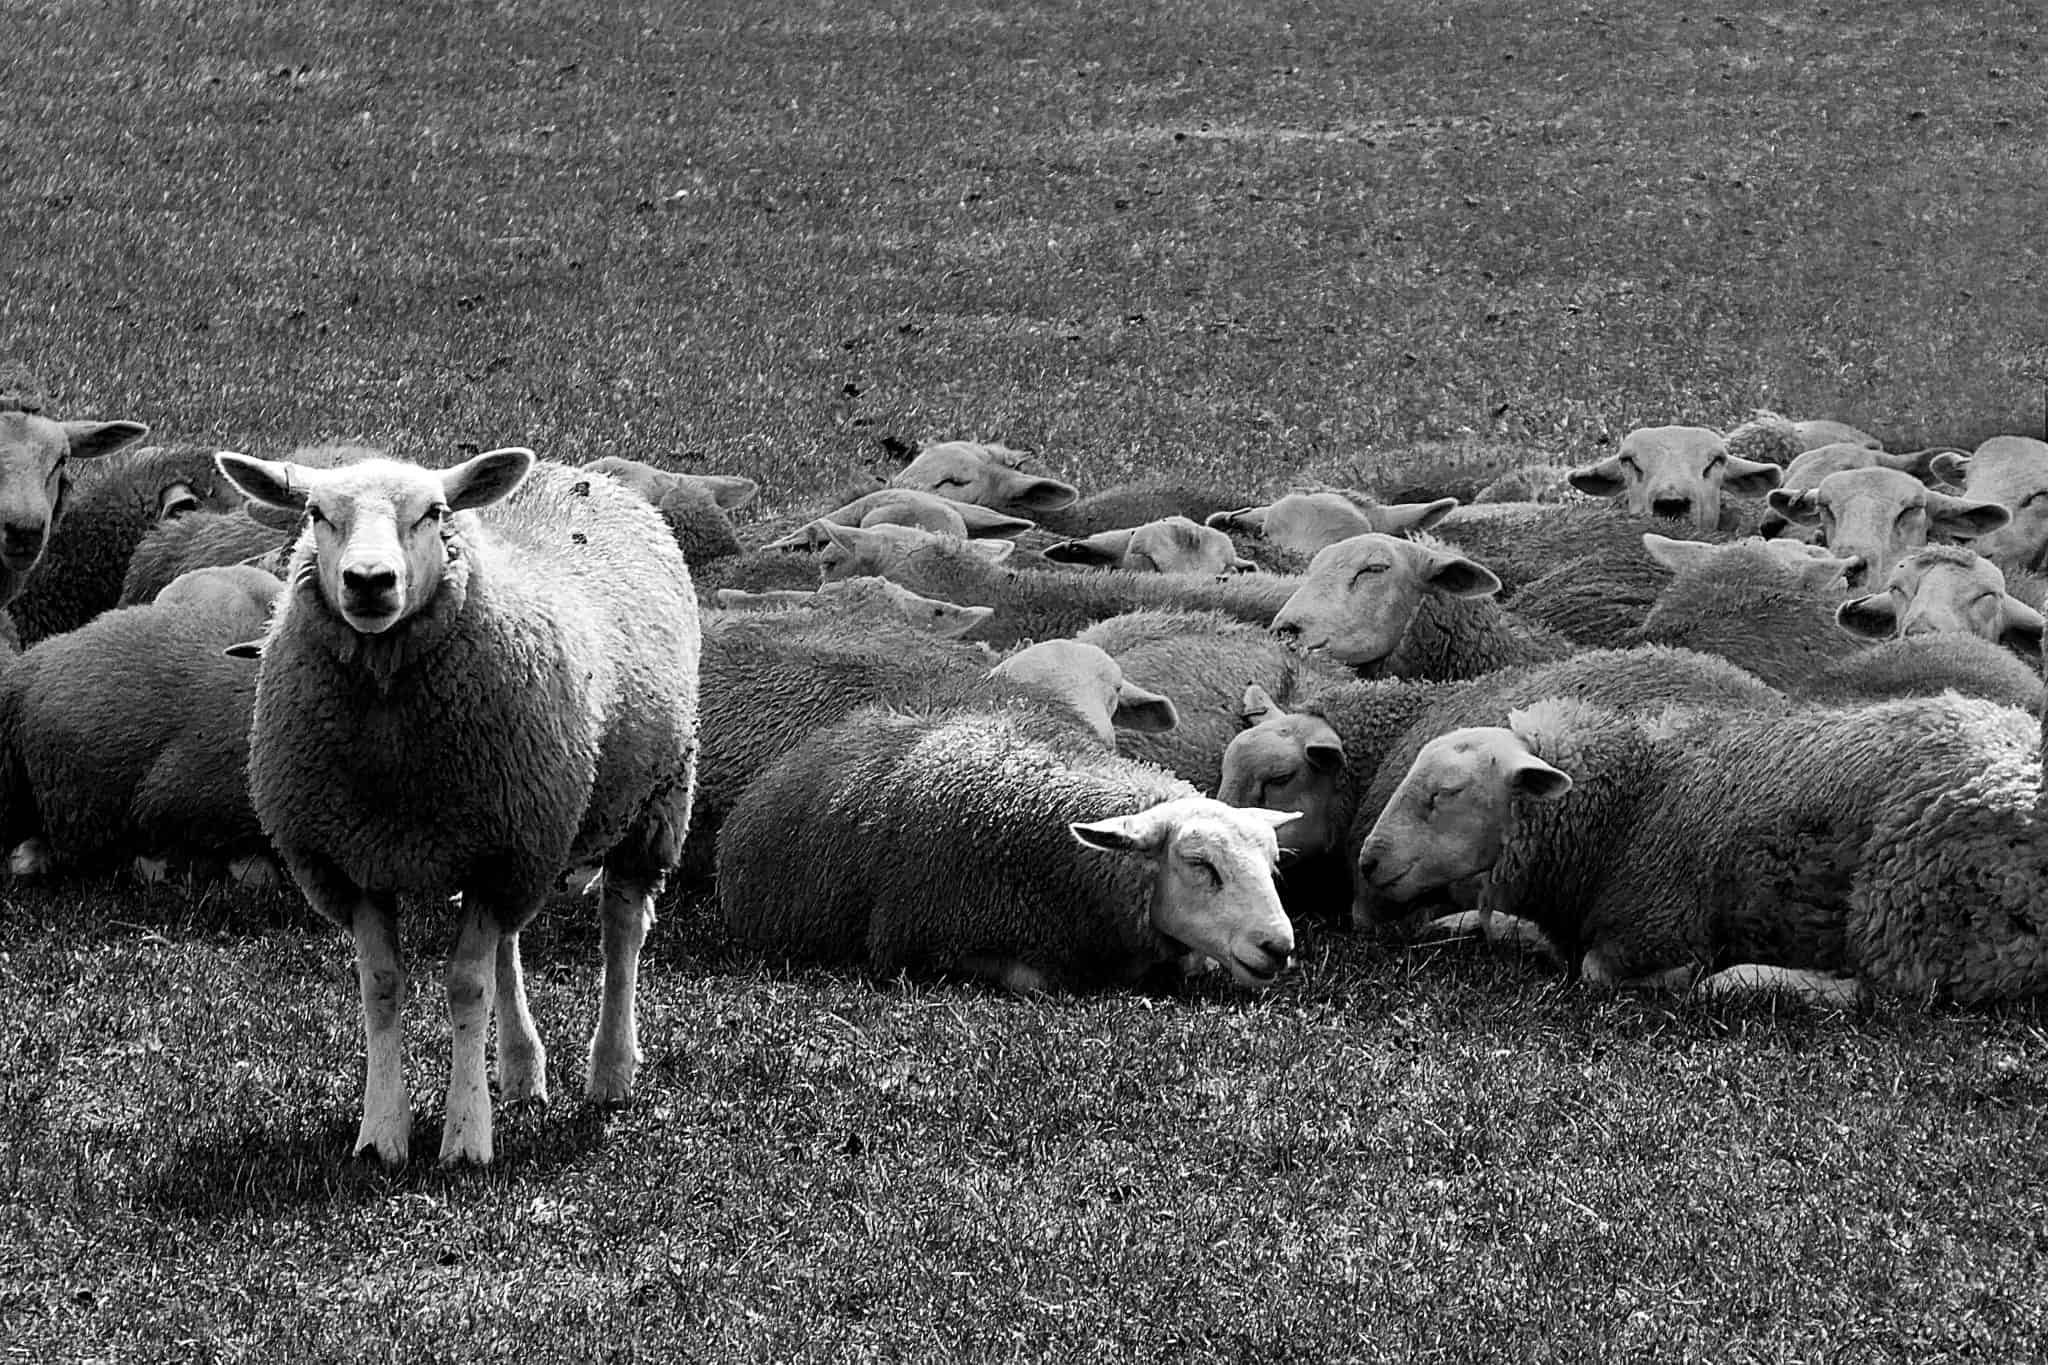 One sheep standing in a field. Afraid of being different?